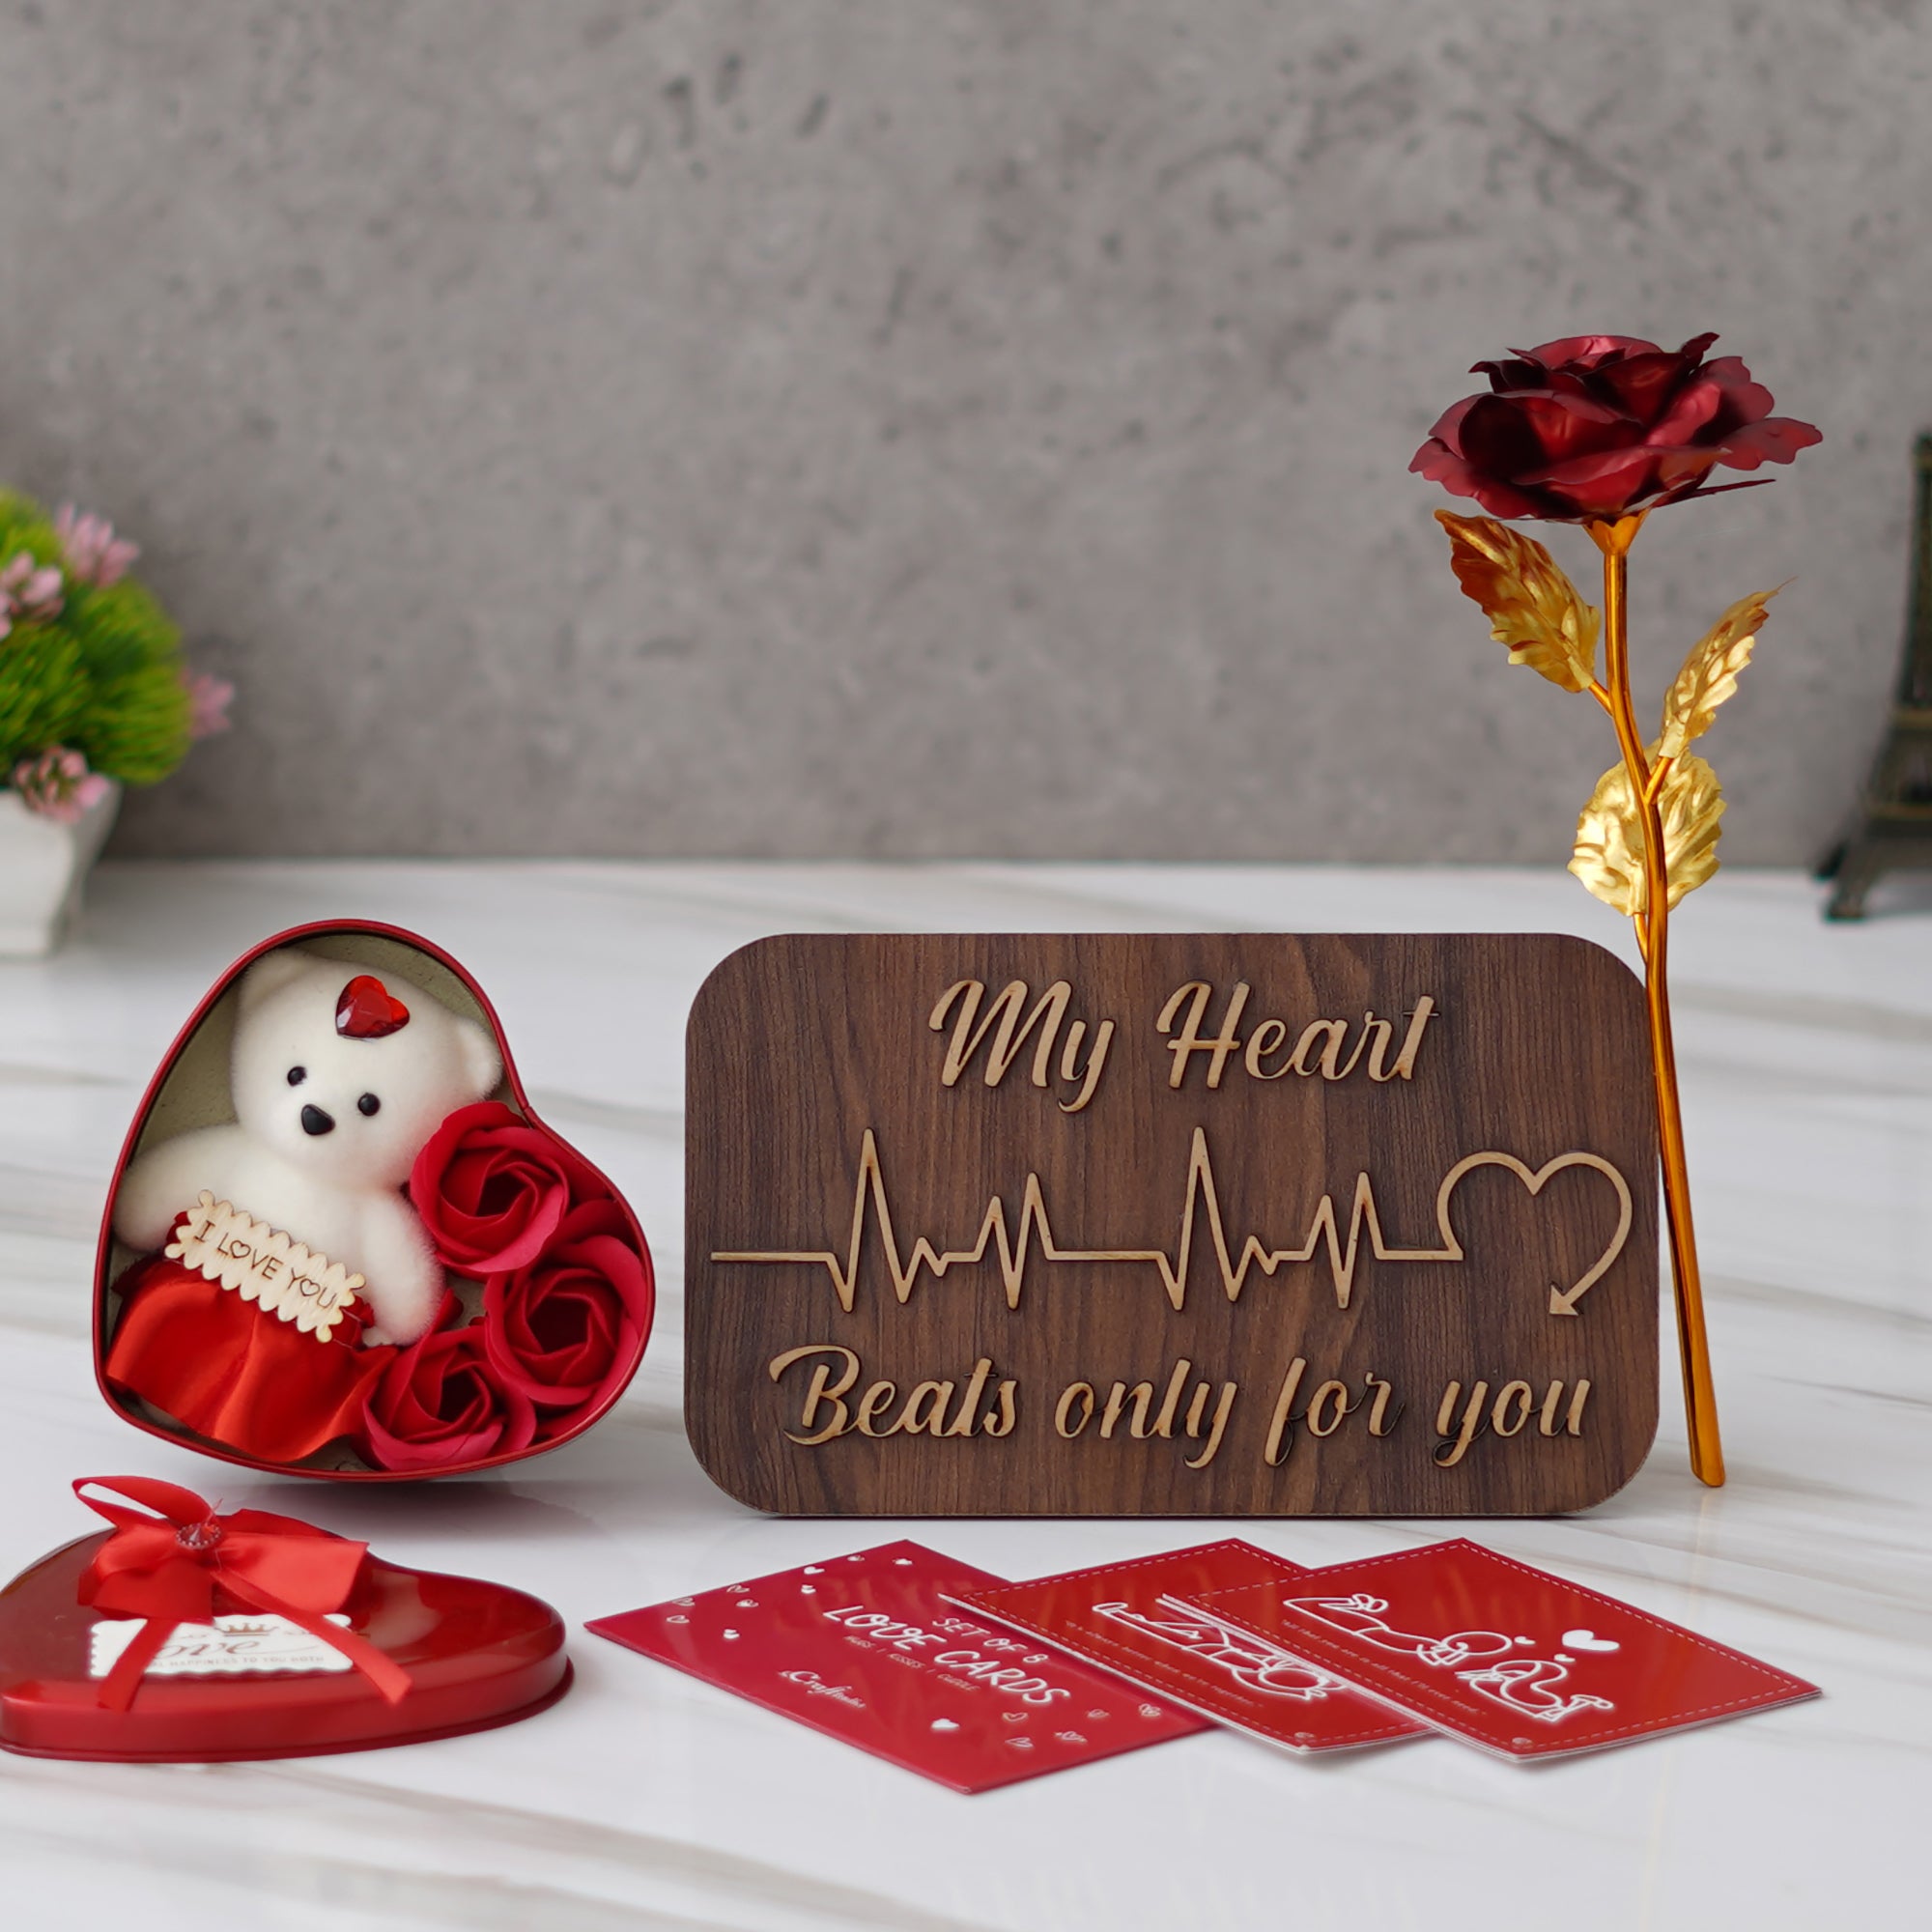 Valentine Combo of Pack of 8 Love Gift Cards, Golden Red Rose Gift Set, "My Heart Beats Only For You" Wooden Showpiece With Stand, Heart Shaped Gift Box Set with White Teddy and Red Roses